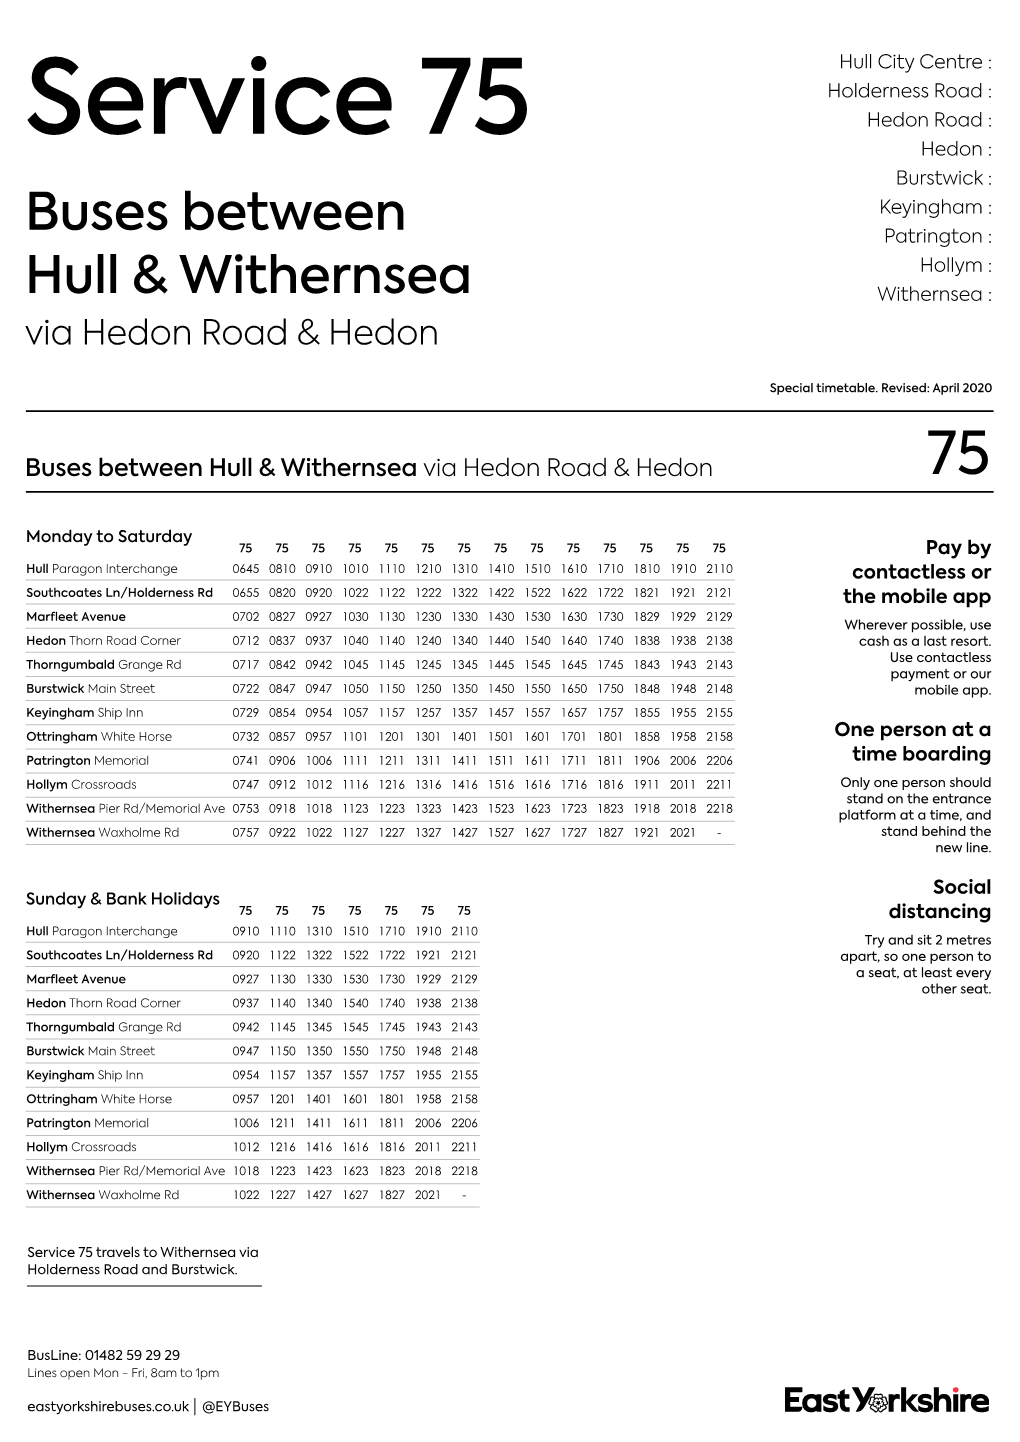 Service 75 Hedon : Burstwick : Keyingham : Buses Between Patrington : Hollym : Hull & Withernsea Withernsea : Via Hedon Road & Hedon